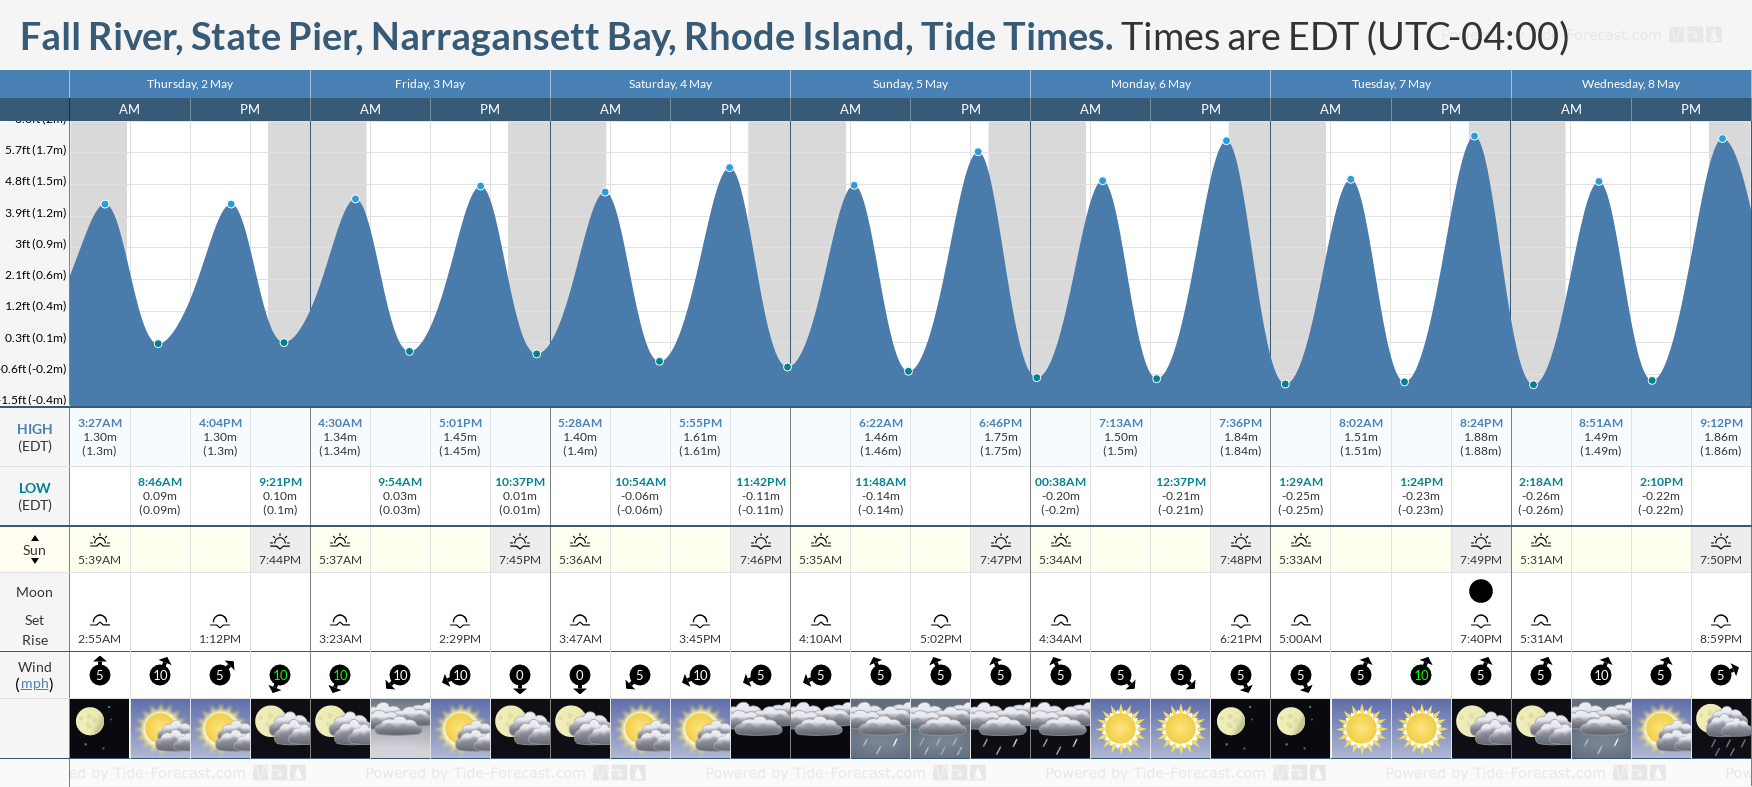 Fall River, State Pier, Narragansett Bay, Rhode Island Tide Chart including high and low tide tide times for the next 7 days